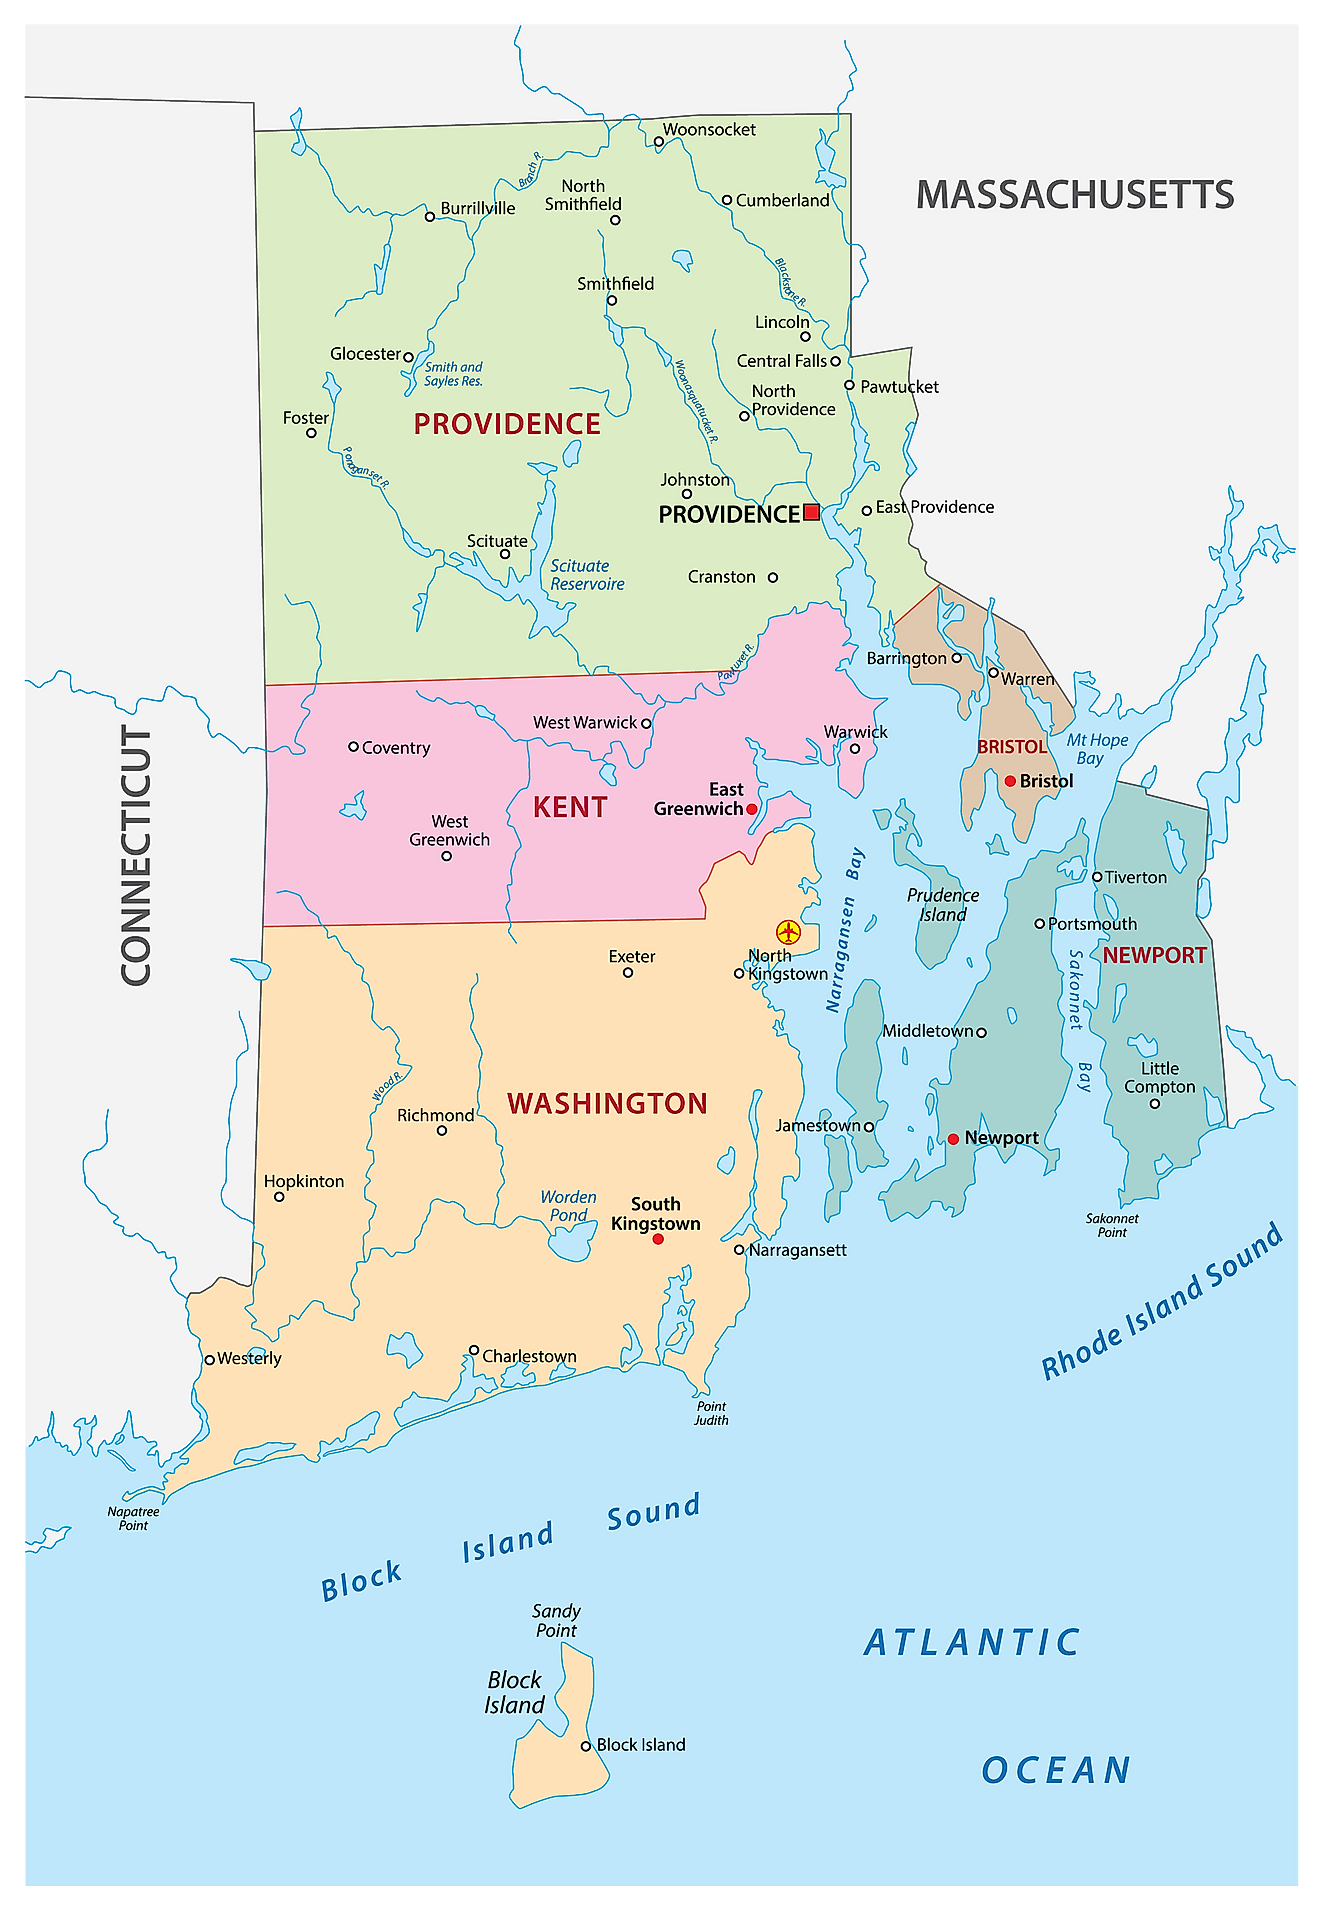 Administrative Map of Rhode Island showing its 5 counties and the capital city - Providence